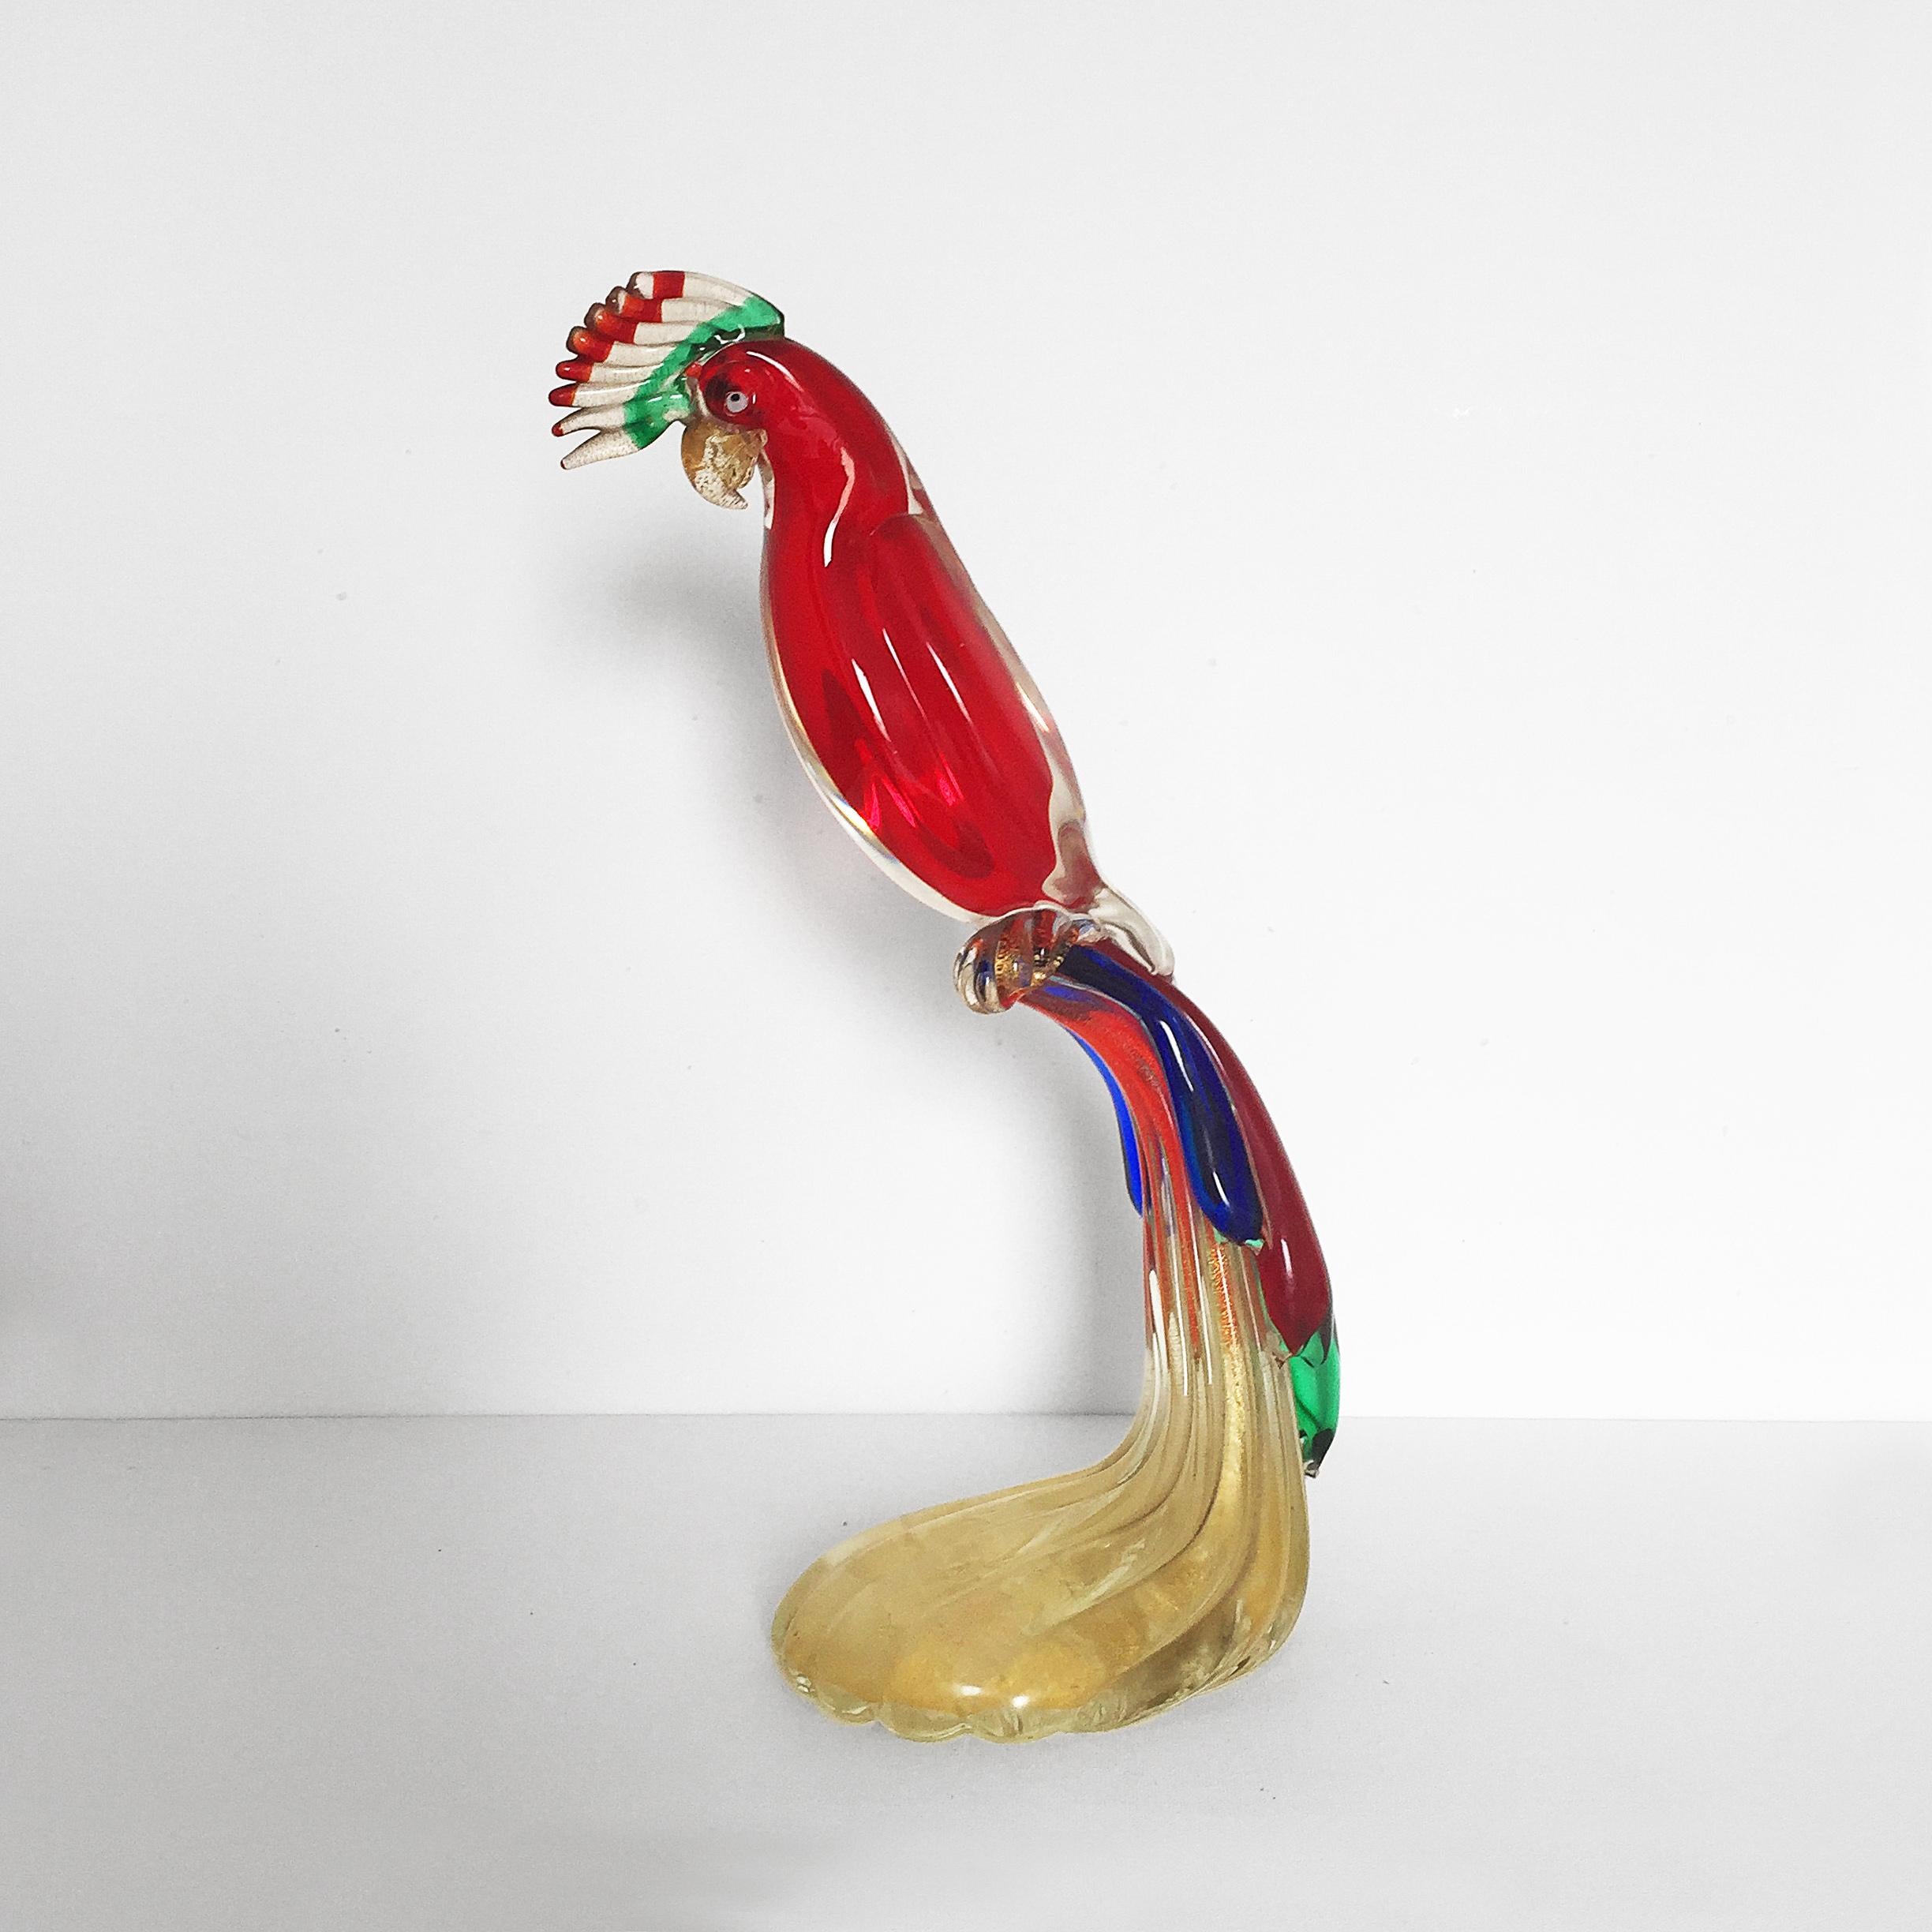 Mid-Century Modern Large Gambaro & Poggi Murano Glass Parrot in Red, Blue, Green and Gold Flakes For Sale